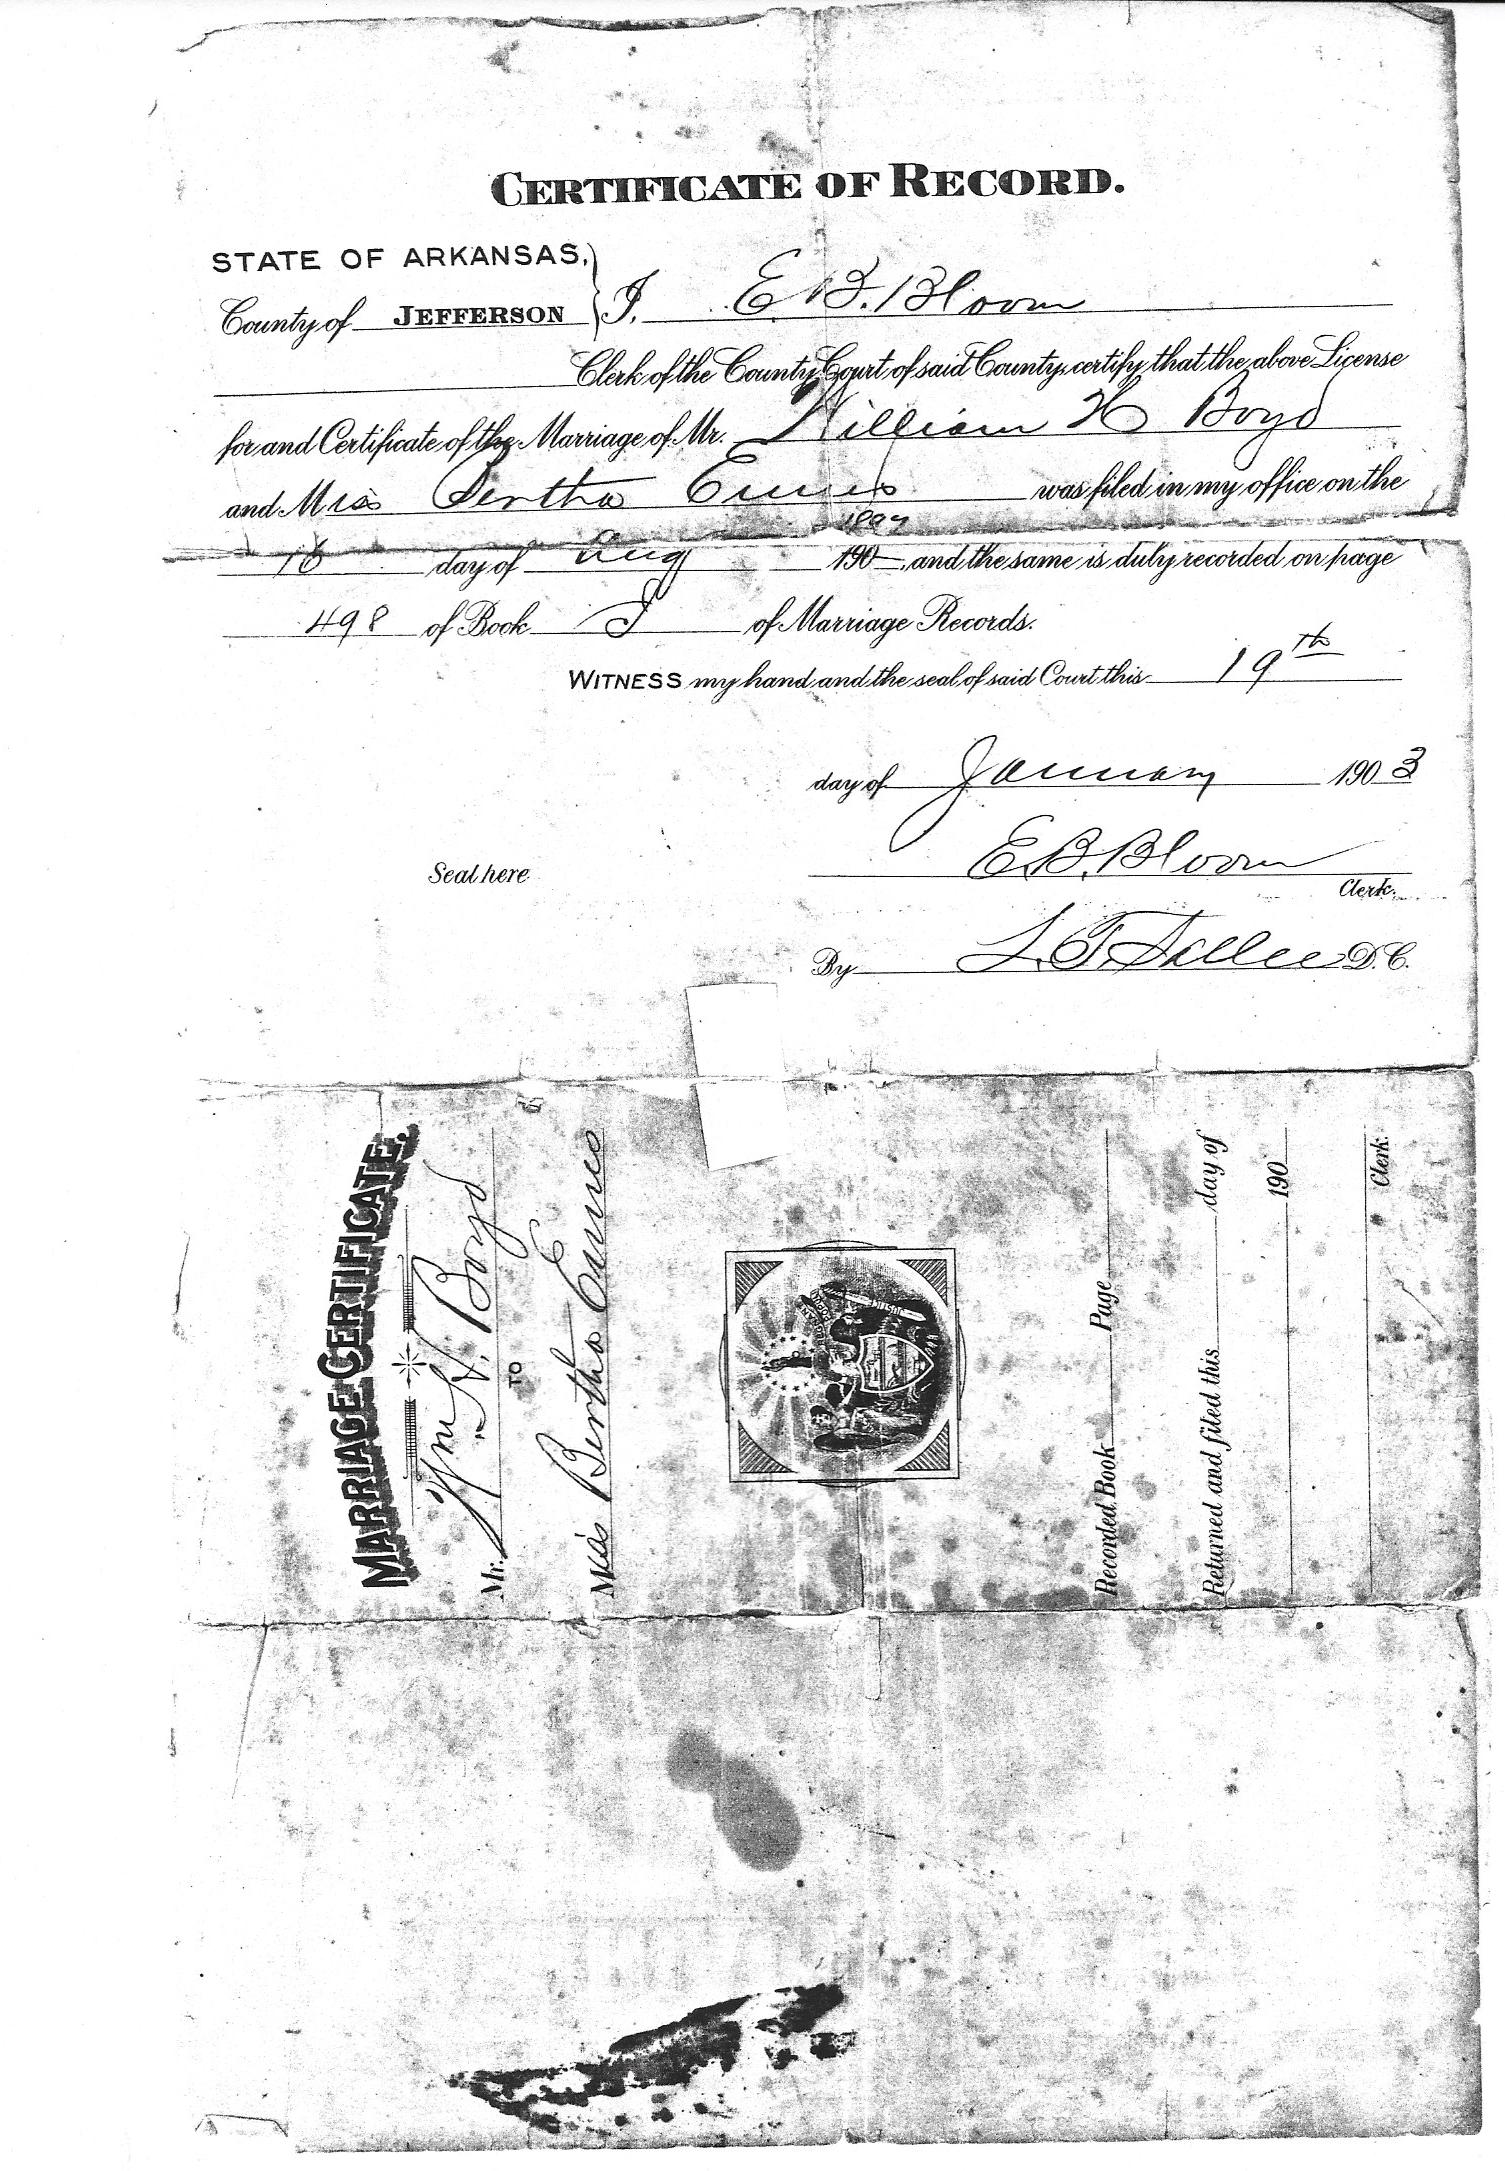 Marriage certificate of William H. Boyd and Bertha Ennes